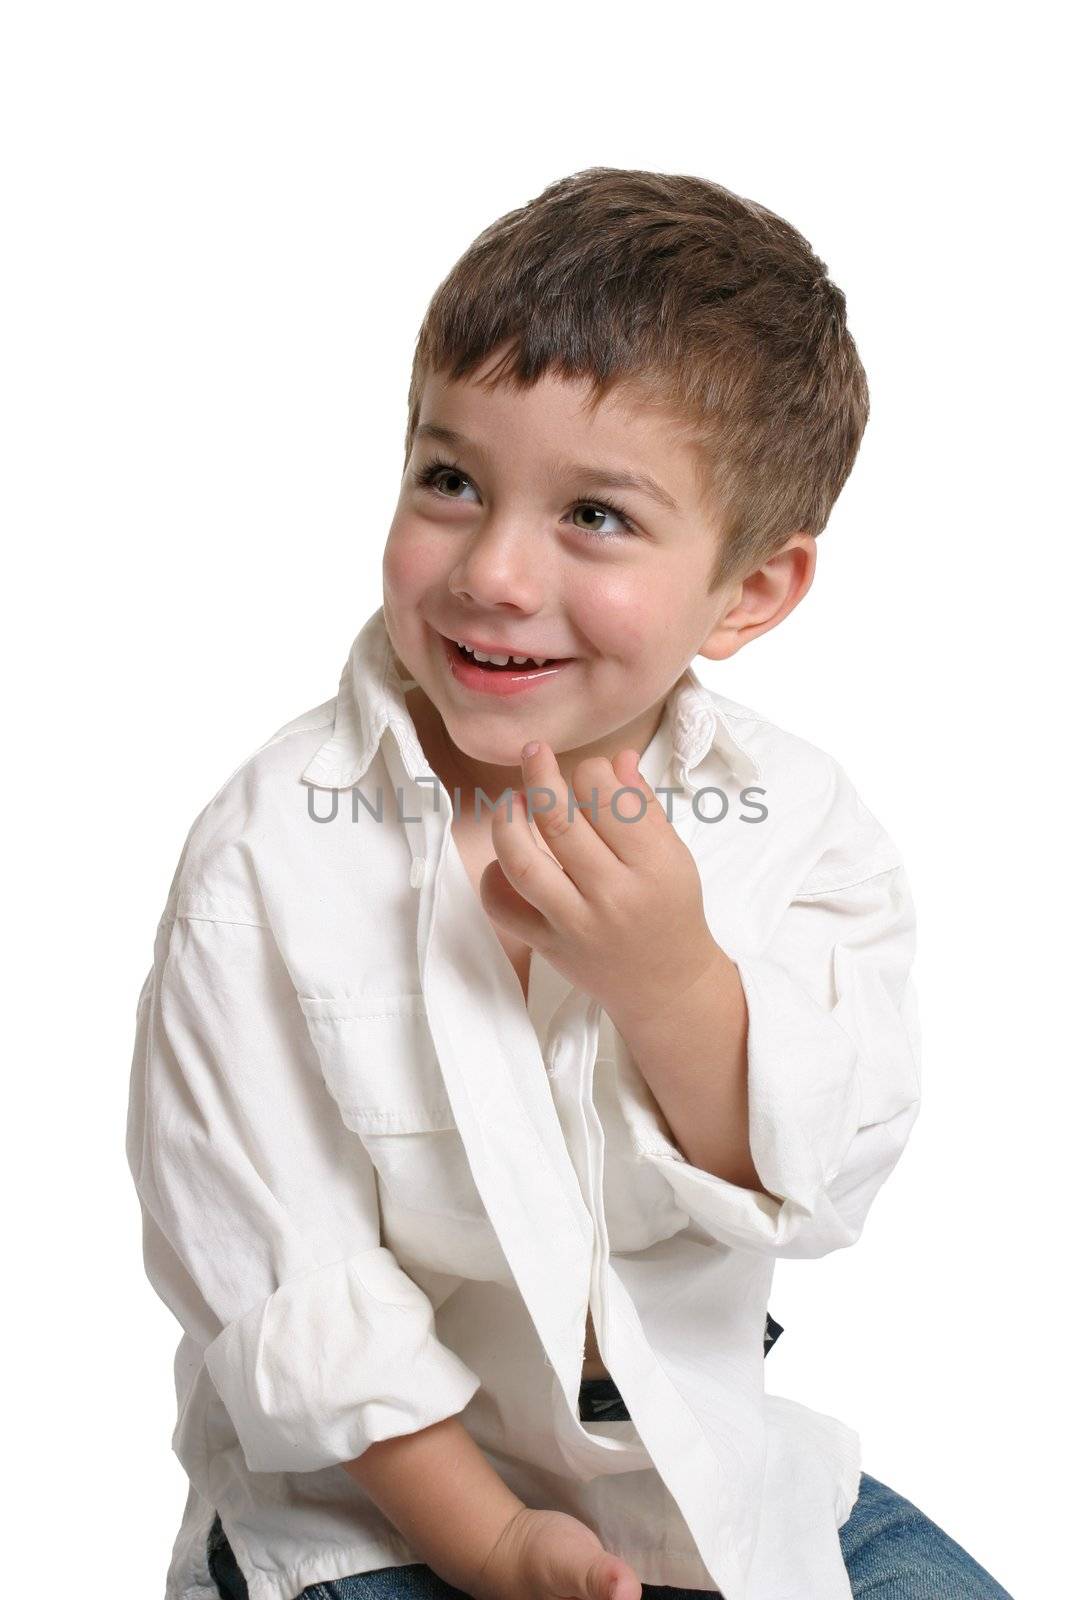 Beautiful young boy with a gorgeous smile - white background with space.